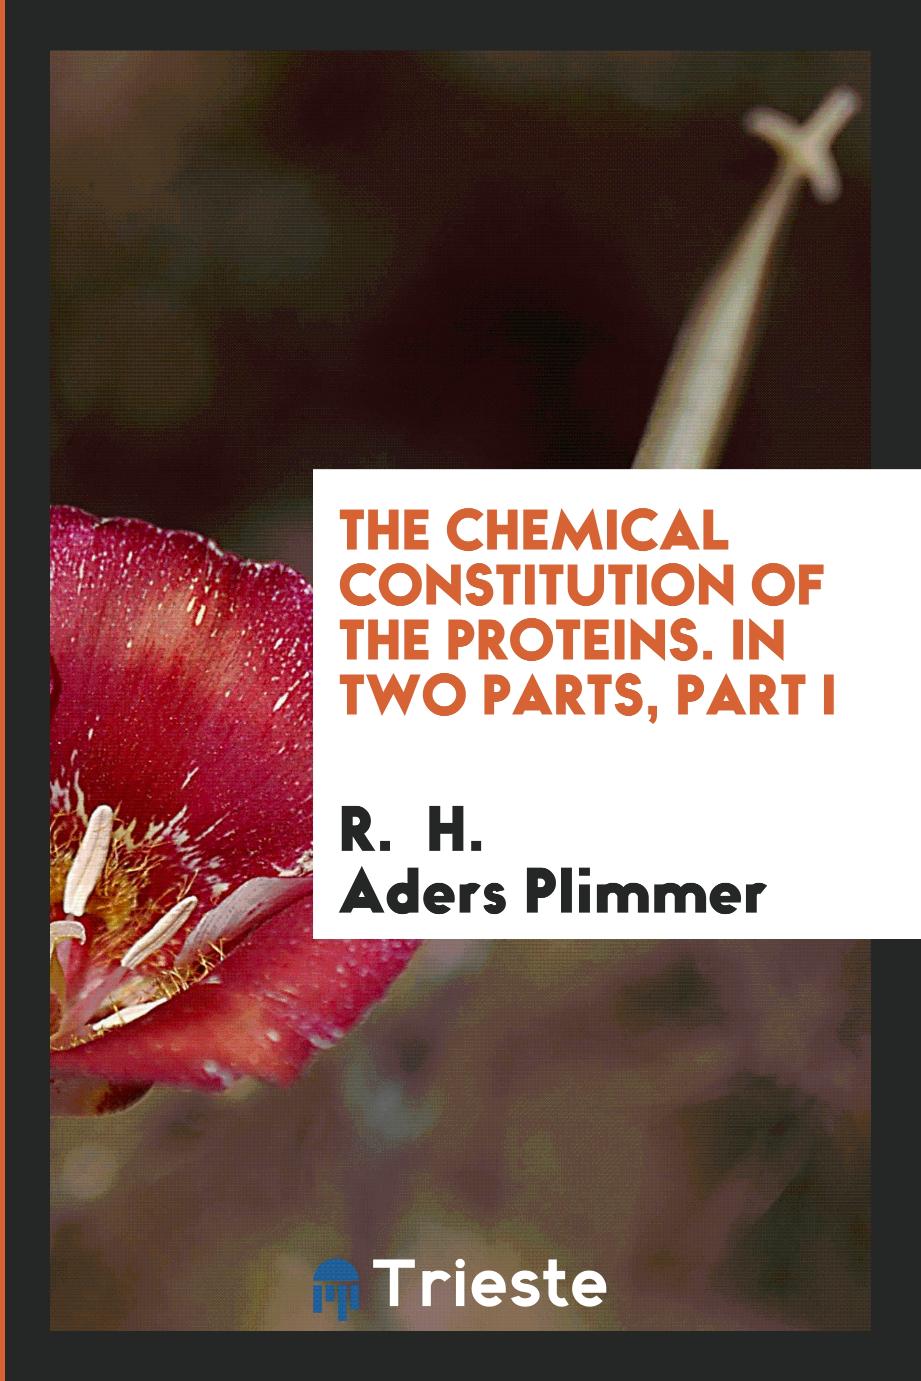 The Chemical Constitution of the Proteins. In Two Parts, Part I